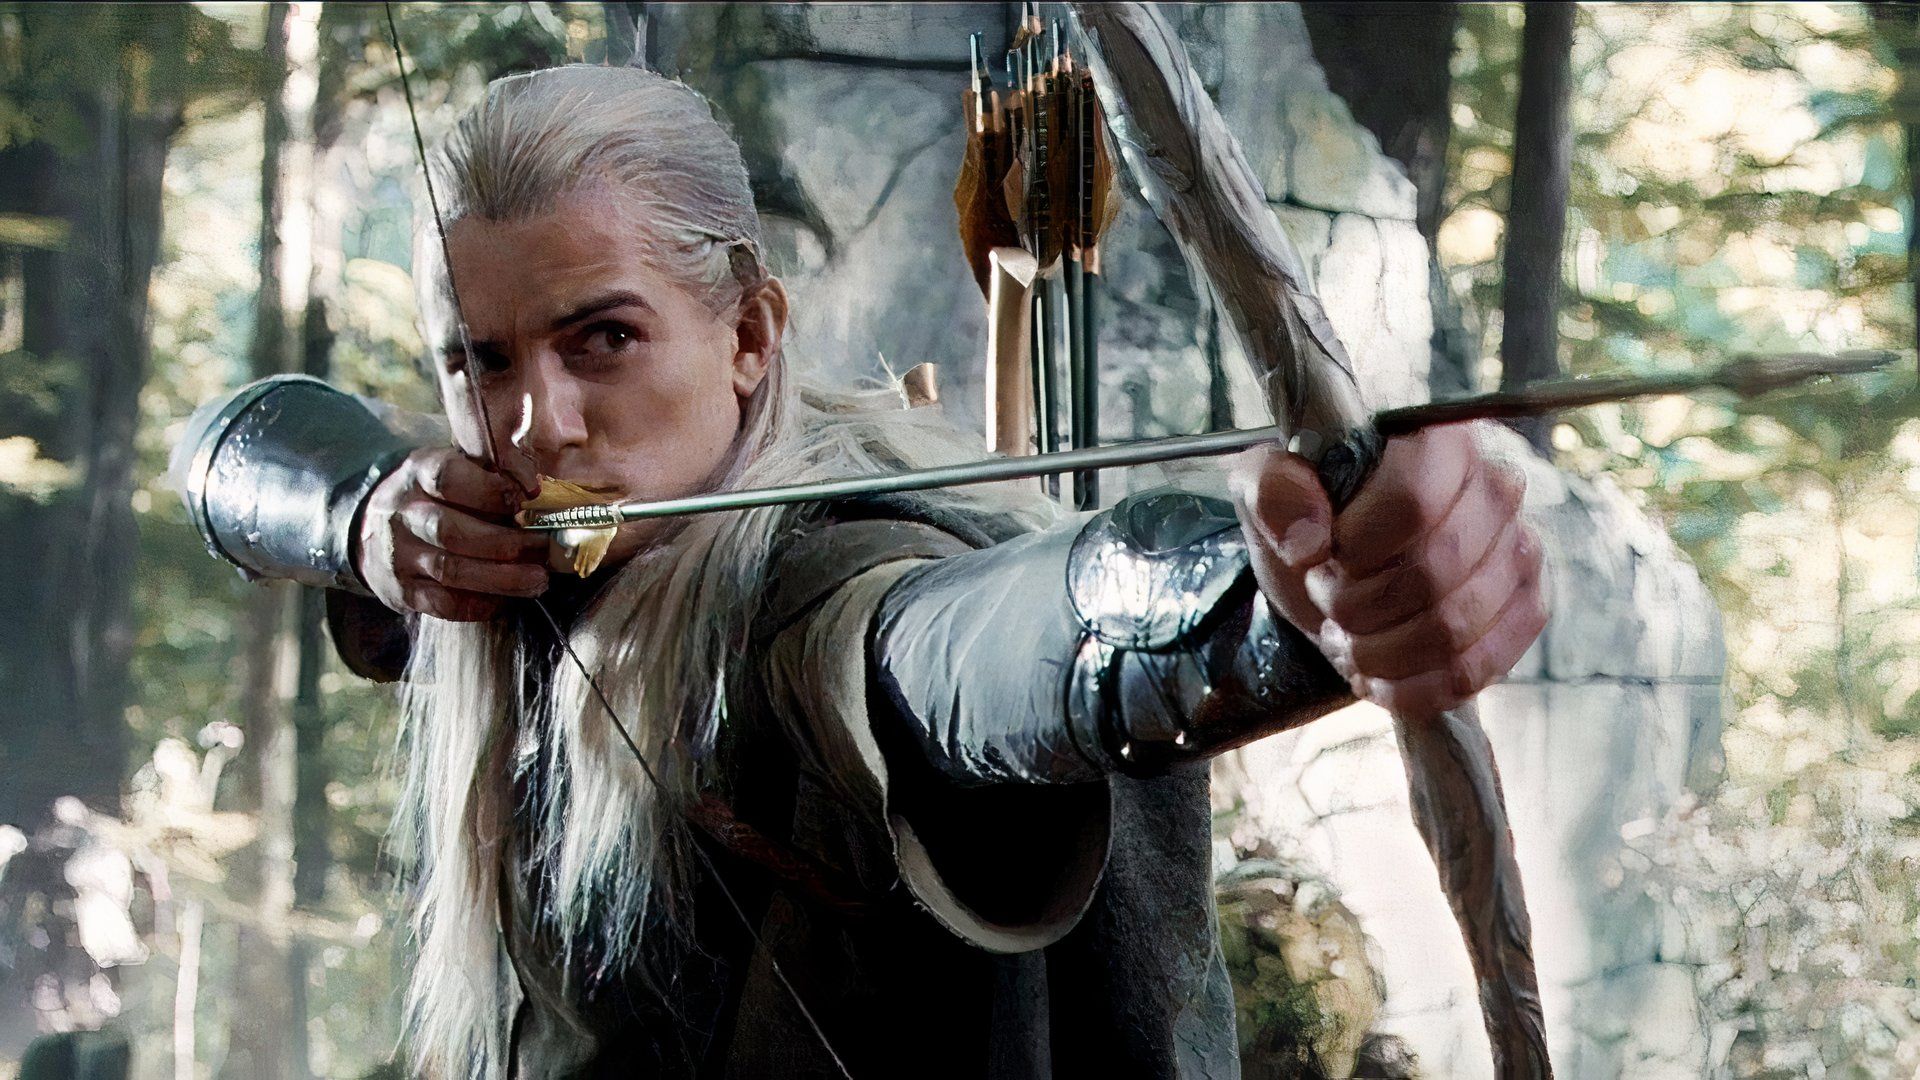 Orlando Bloom as Legolas draws his bow in The Lord of the Rings: The Fellowship of the Ring